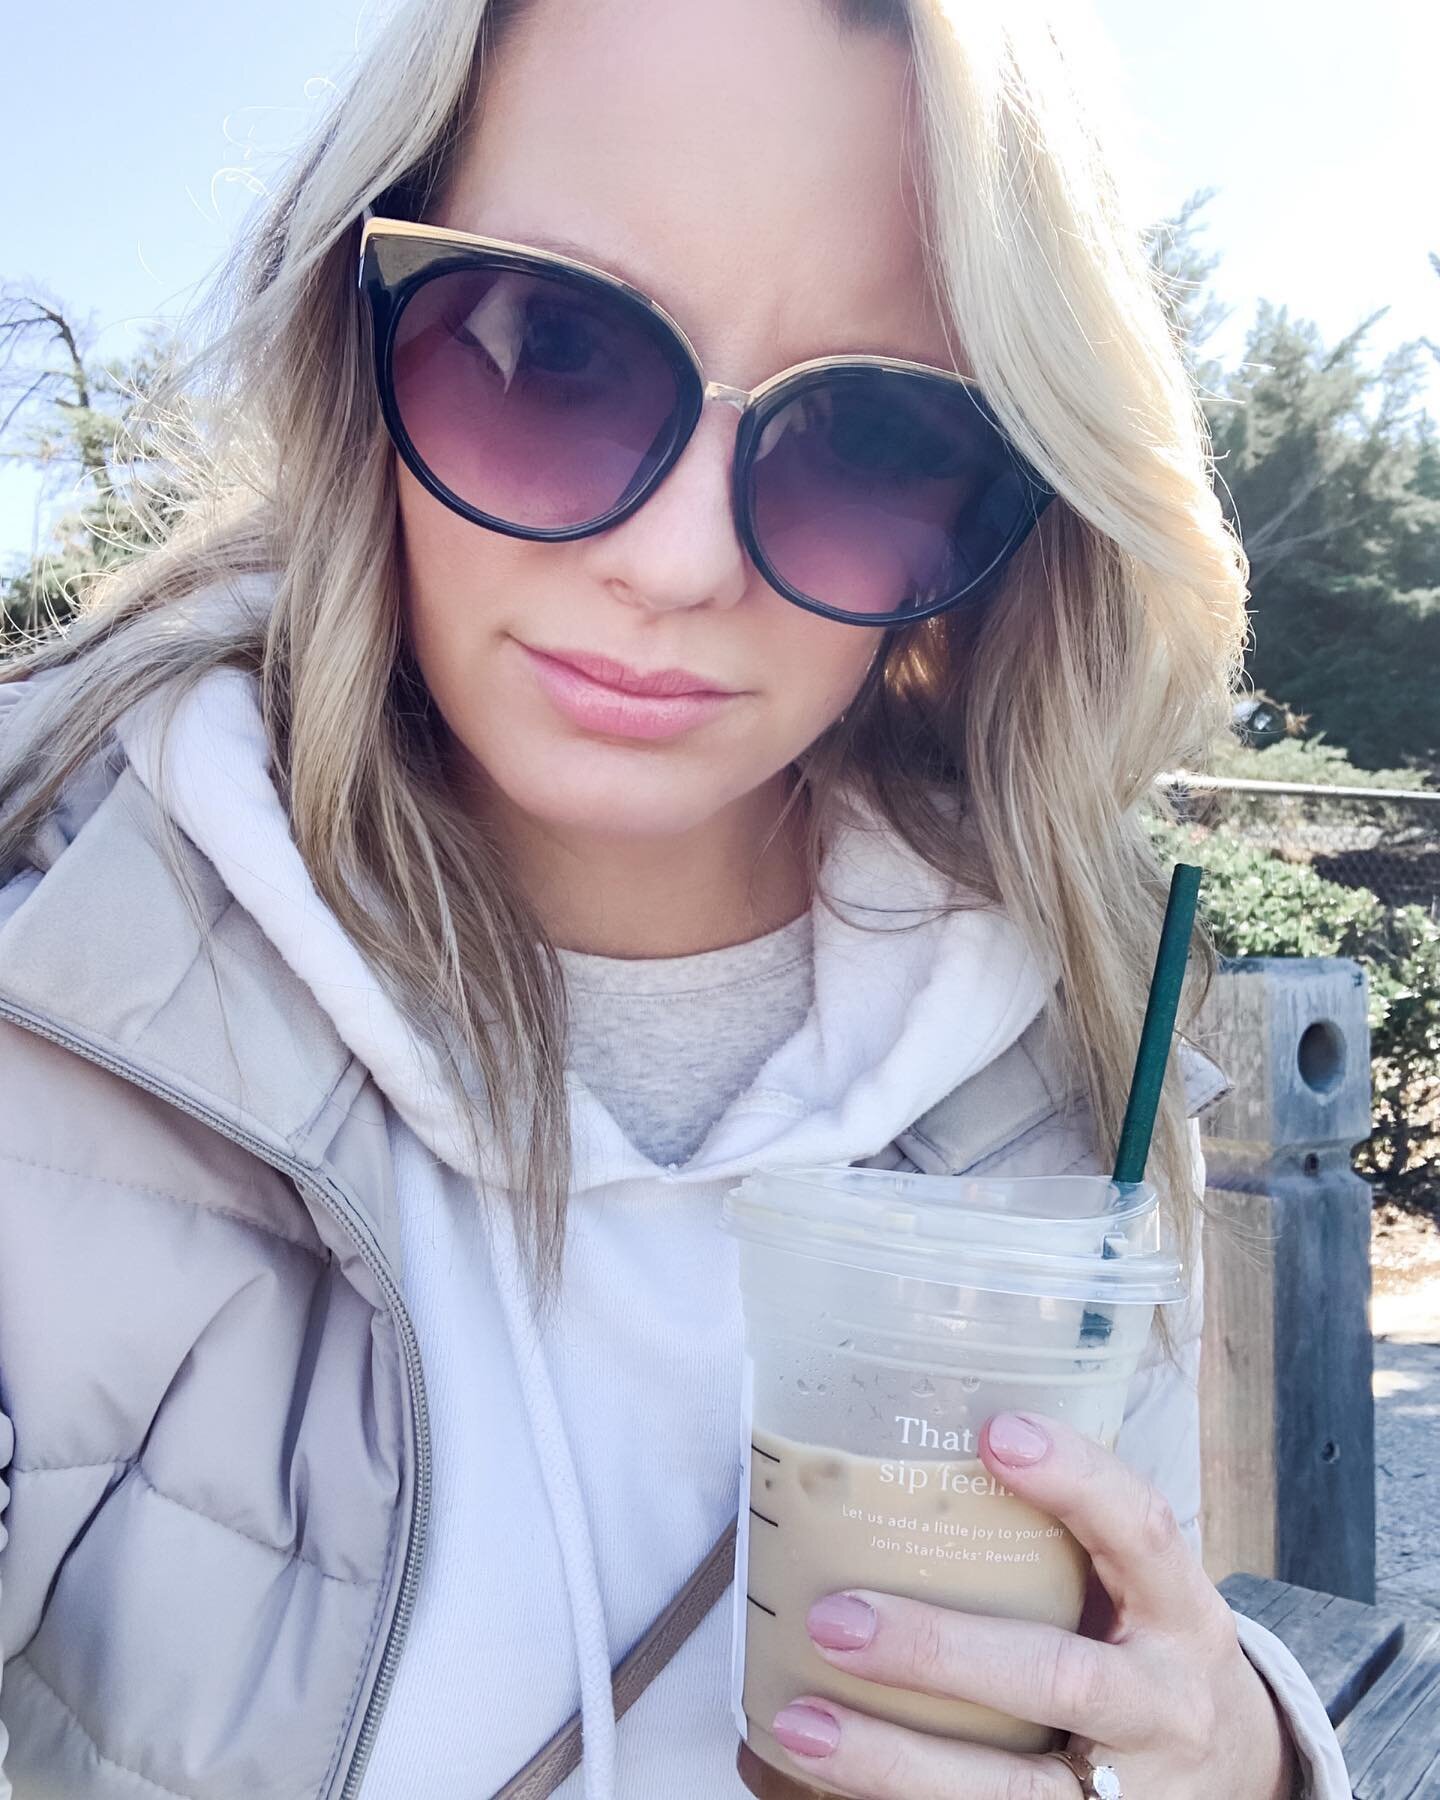 Anyone else also order iced coffee in February? My hands might be cold but my soul is happy! 
#icedcoffee #coffeemom #coffeelover #coffeetime #coffeeaddict